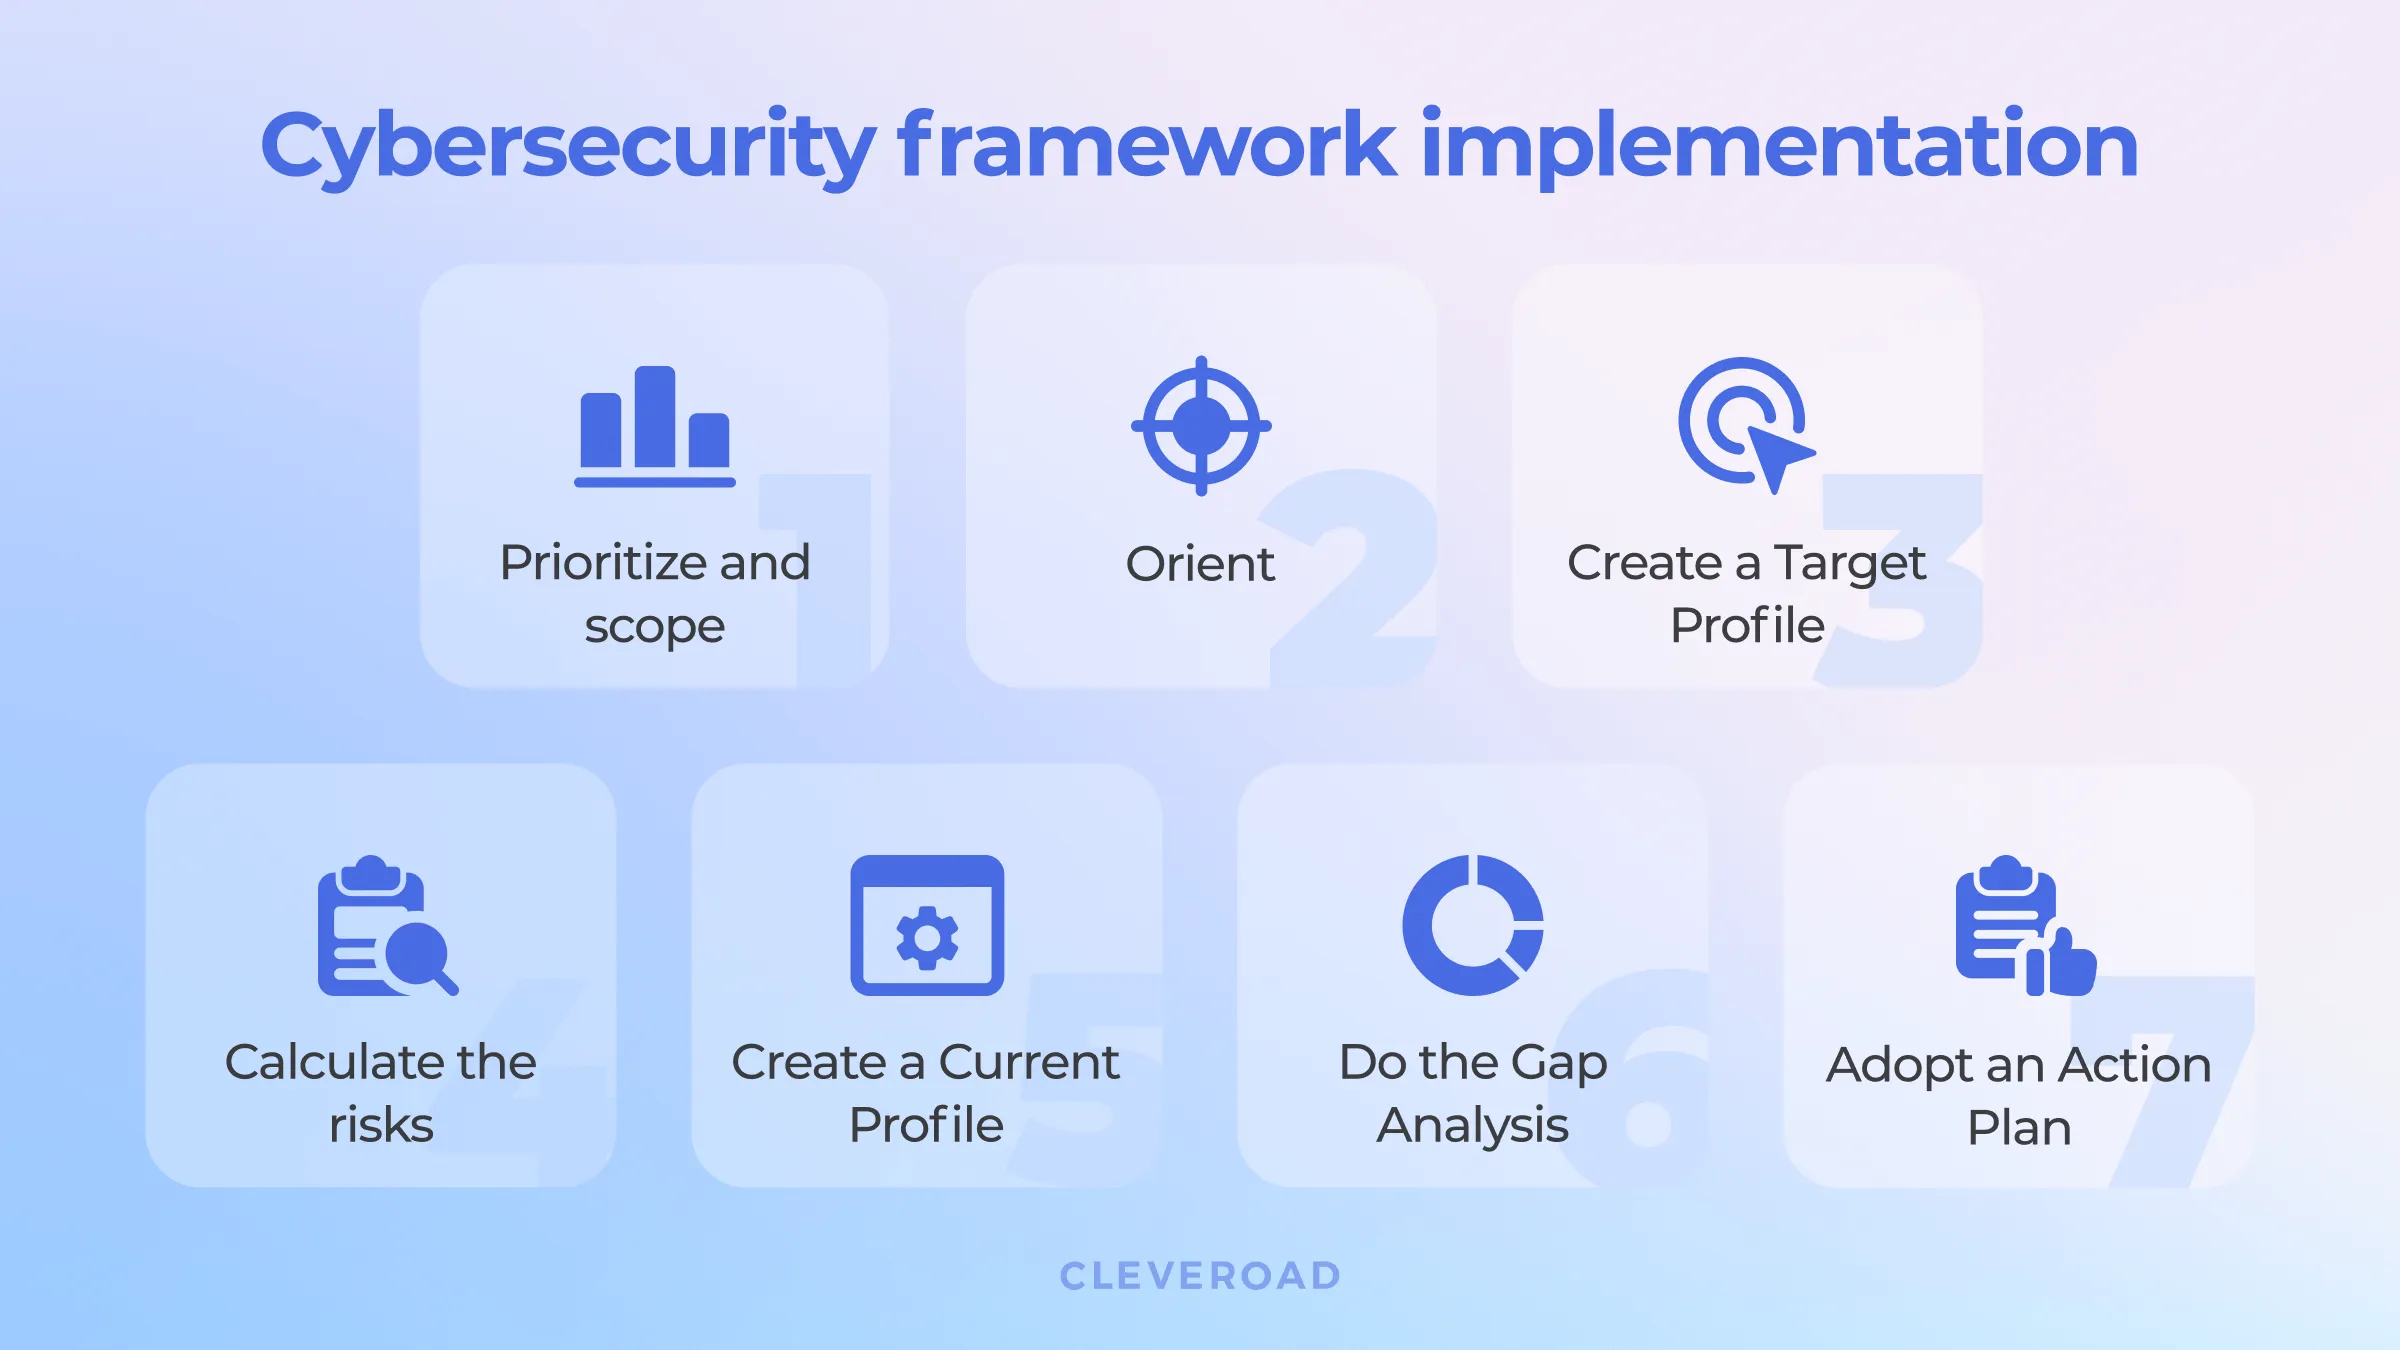 How to implement cybersecurity frameworks